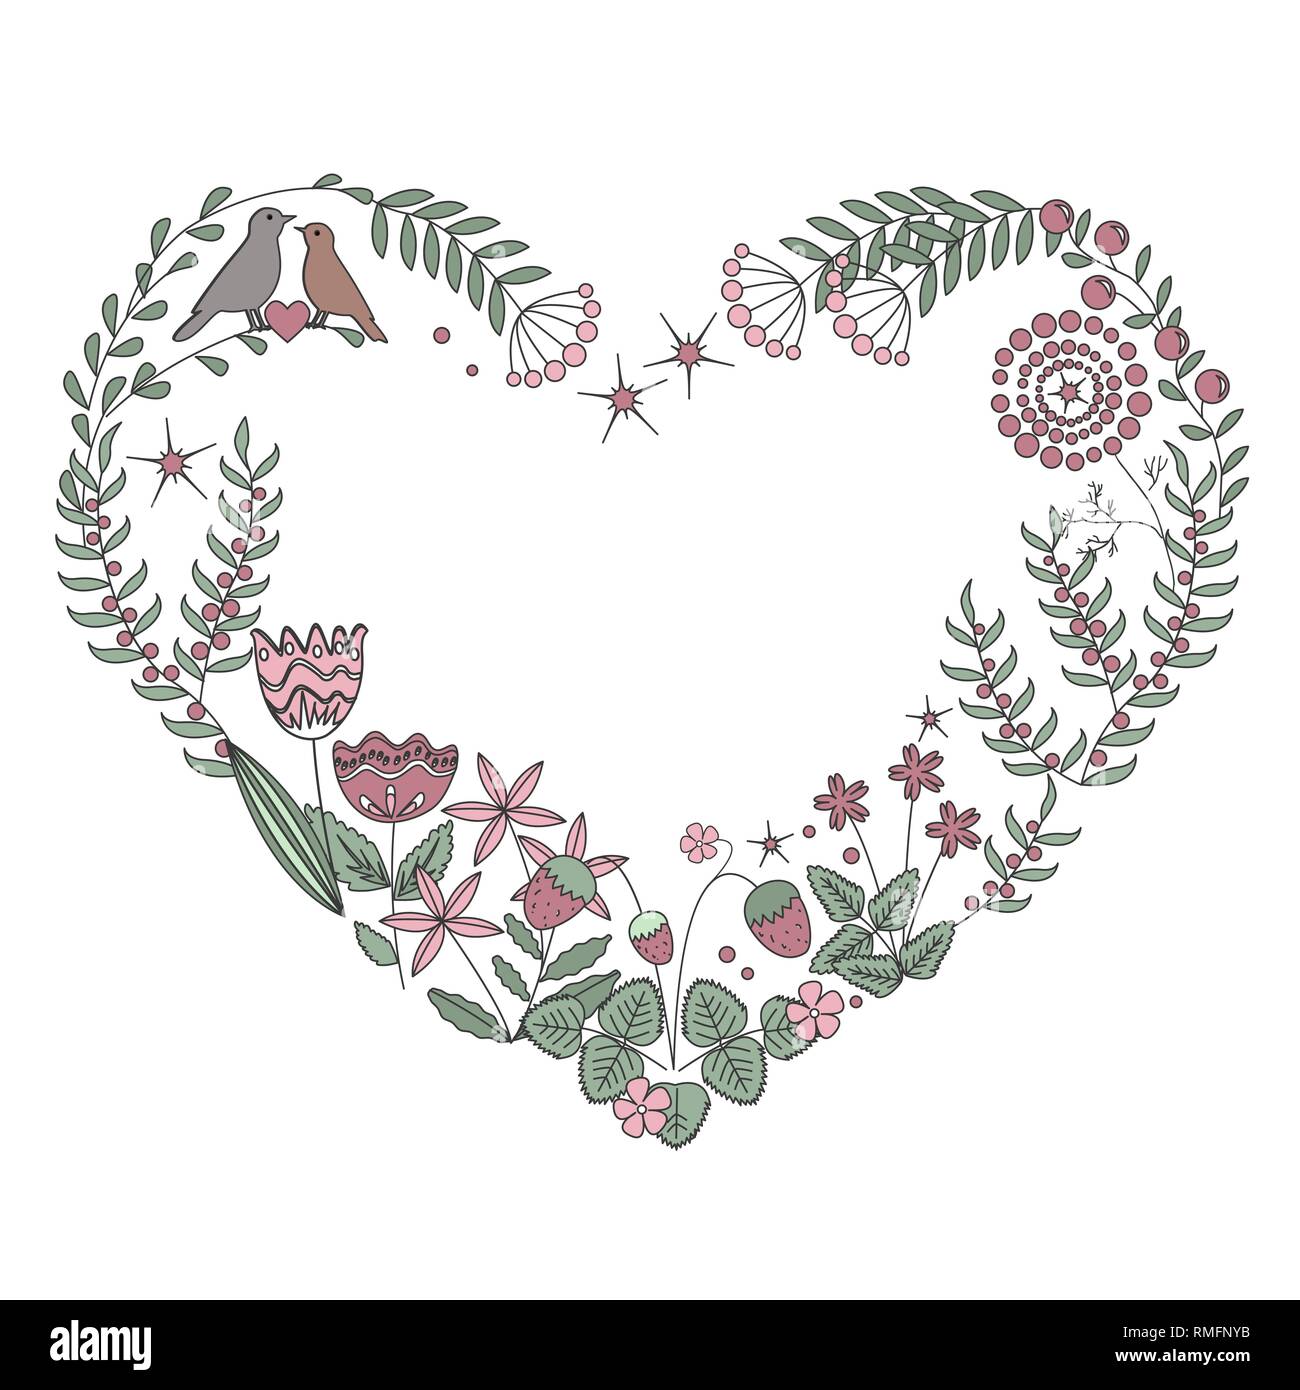 Floral heart frame with isolated flowers, herbs and leaves. Vector illustration Stock Vector